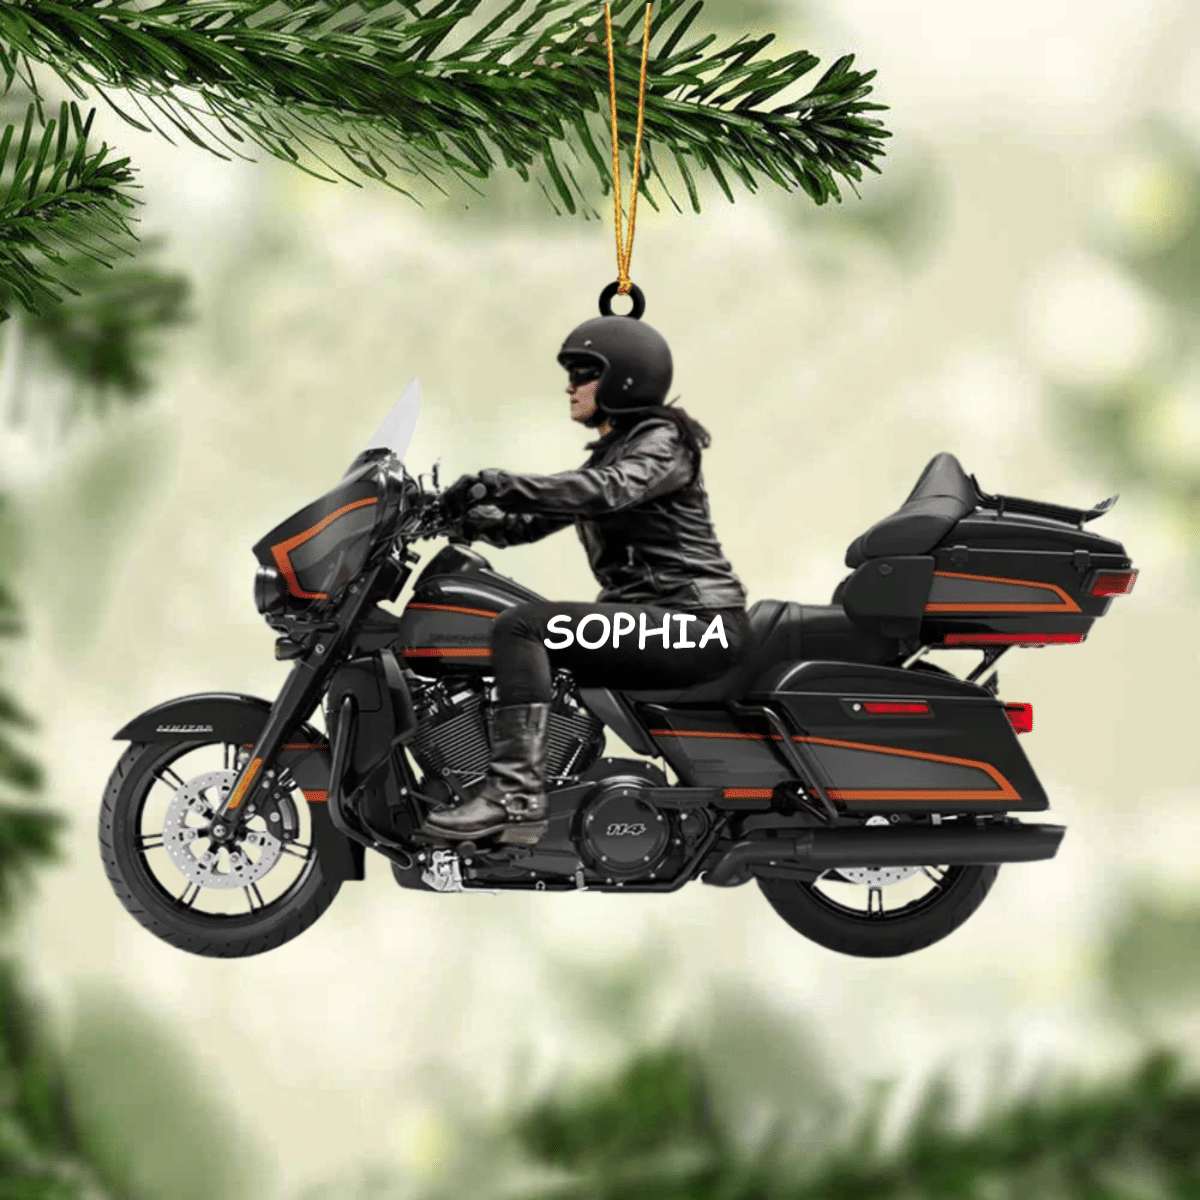 2022 Personalized Biker Woman Harley Motorcycle Christmas Ornament for Biker Gangster Lovers/ Gift for Wife